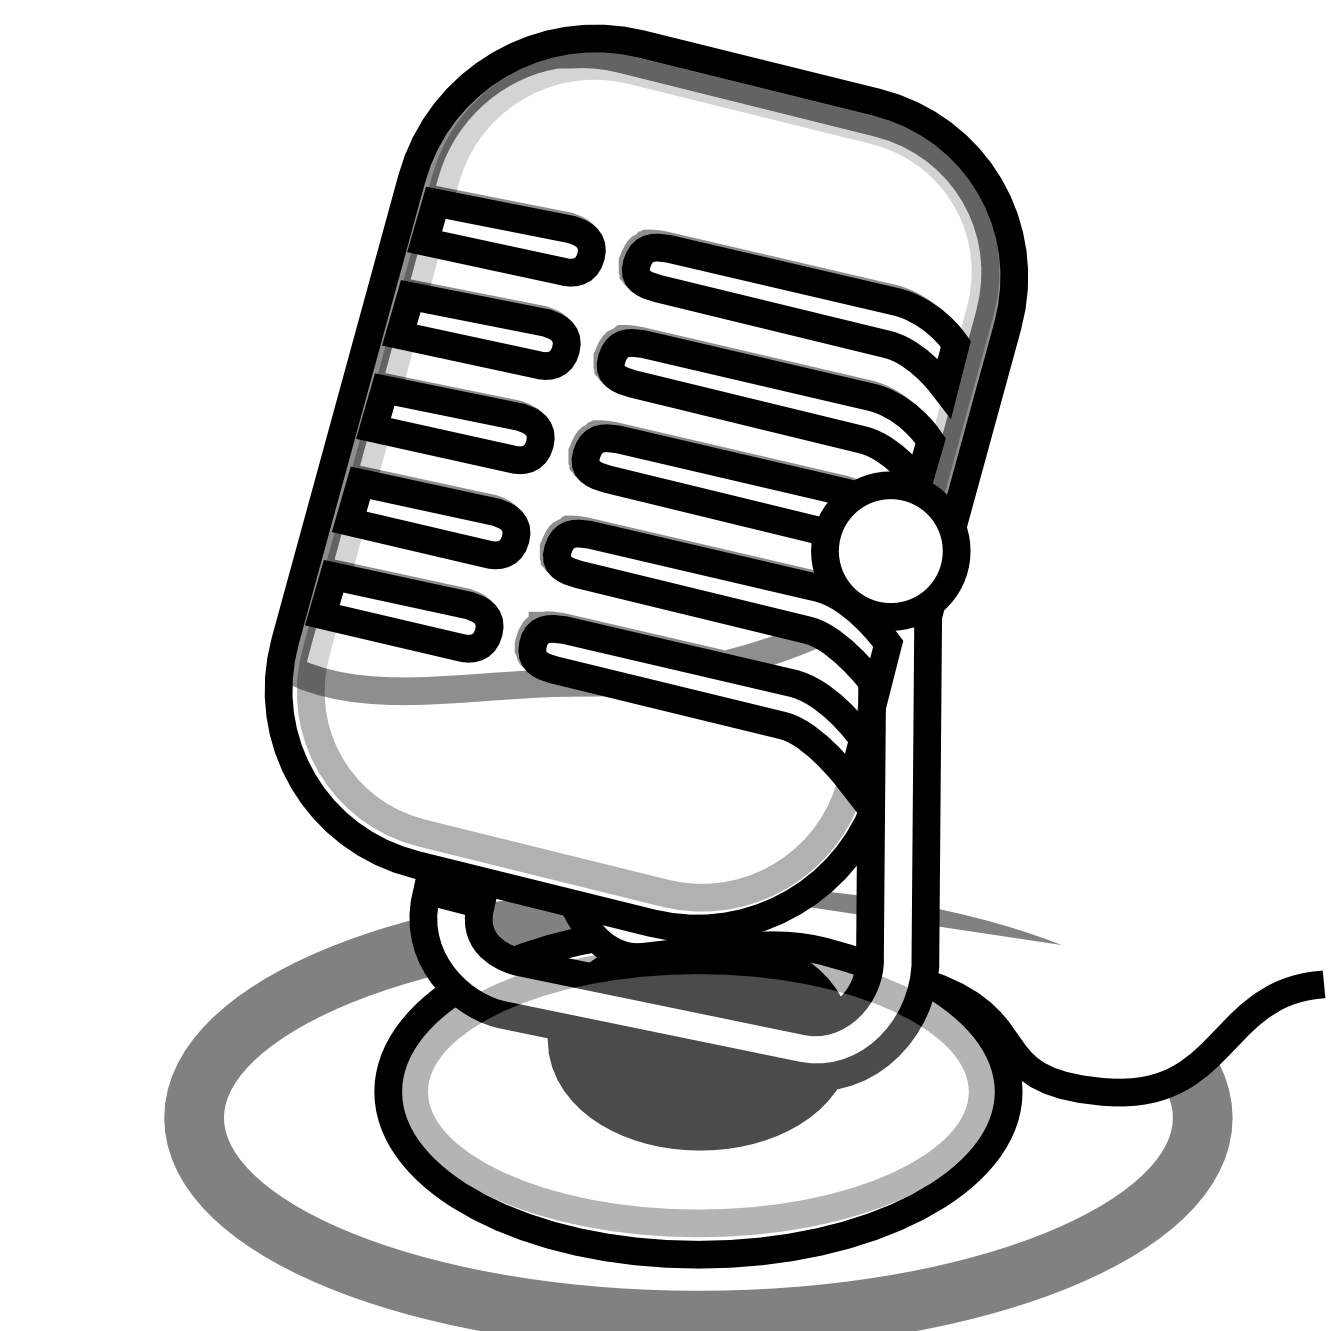 Radio Microphone Clipart - Radio Black And White, Transparent background PNG HD thumbnail